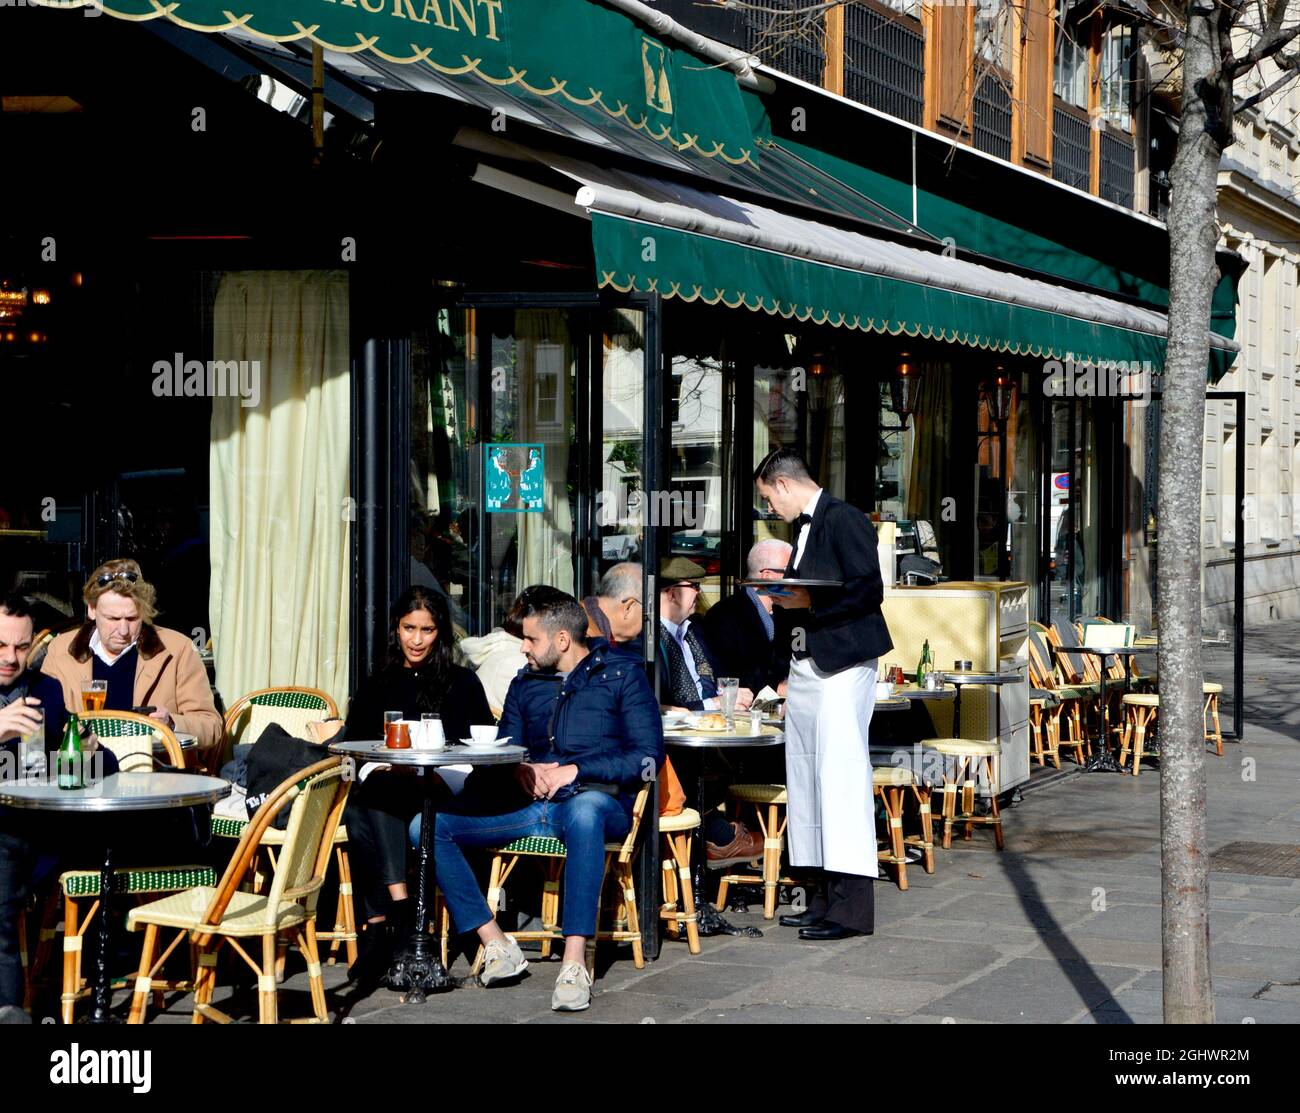 lunch time in Parisian restaurants Stock Photo